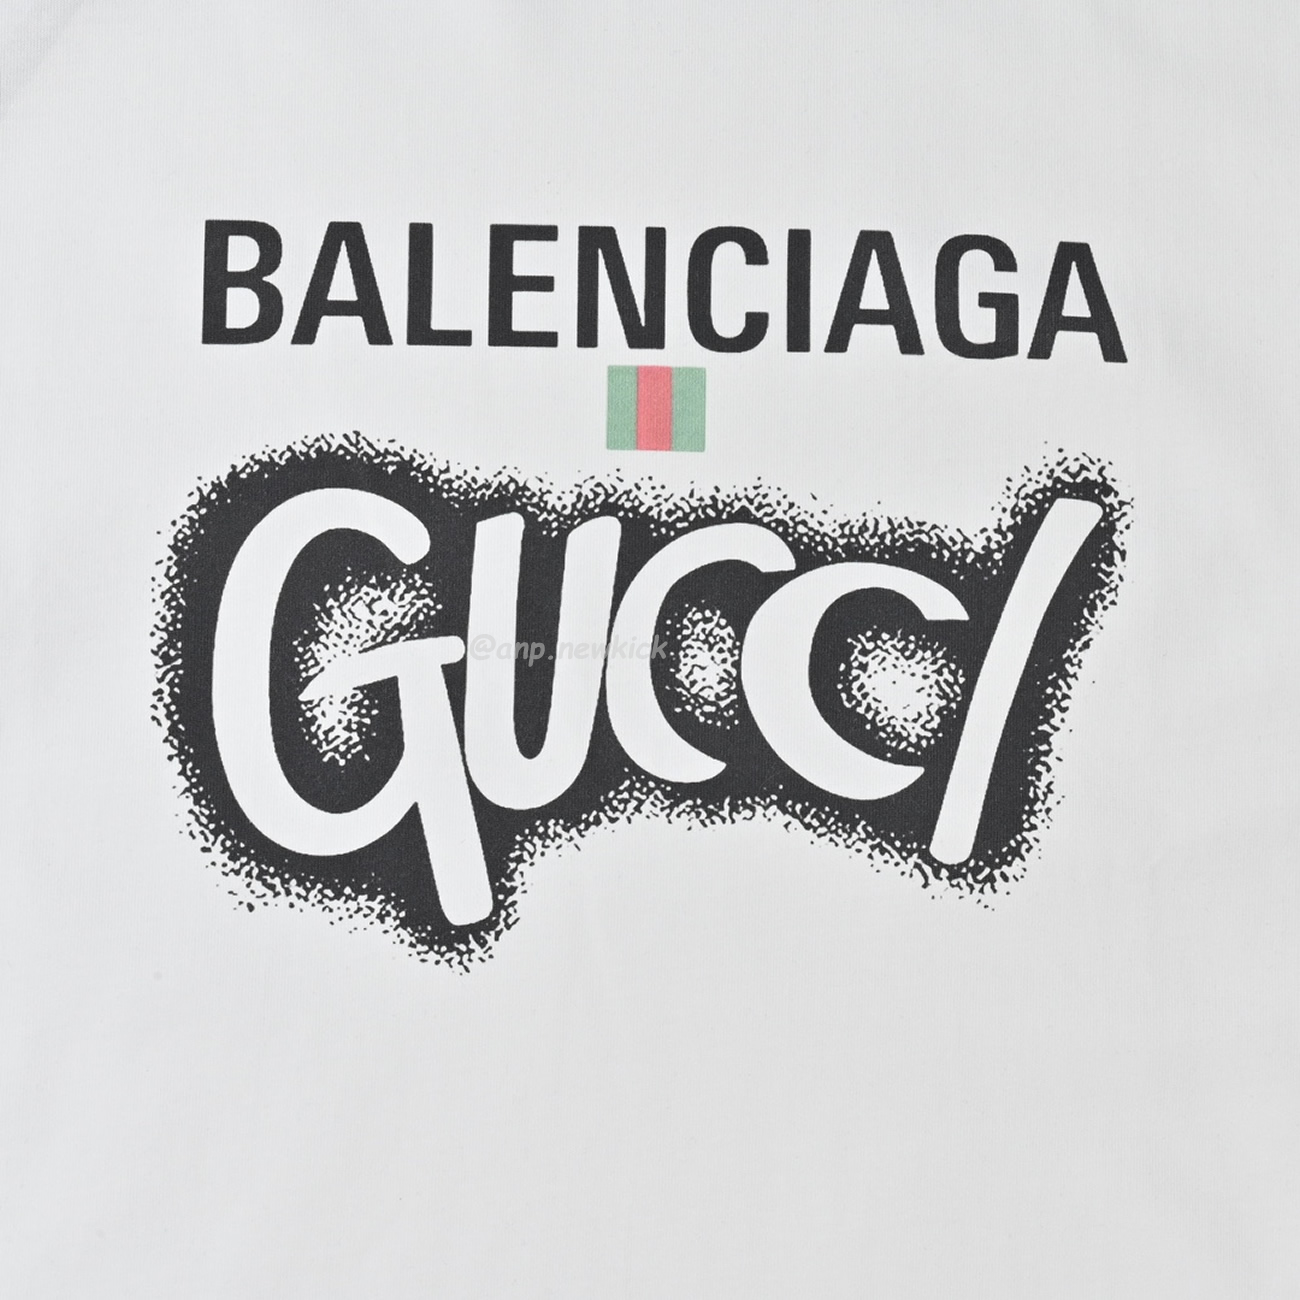 Balenciaga X Gucci Co Branded Double B Letter Printed Logo Printed Short Sleeved T Shirt (12) - newkick.org